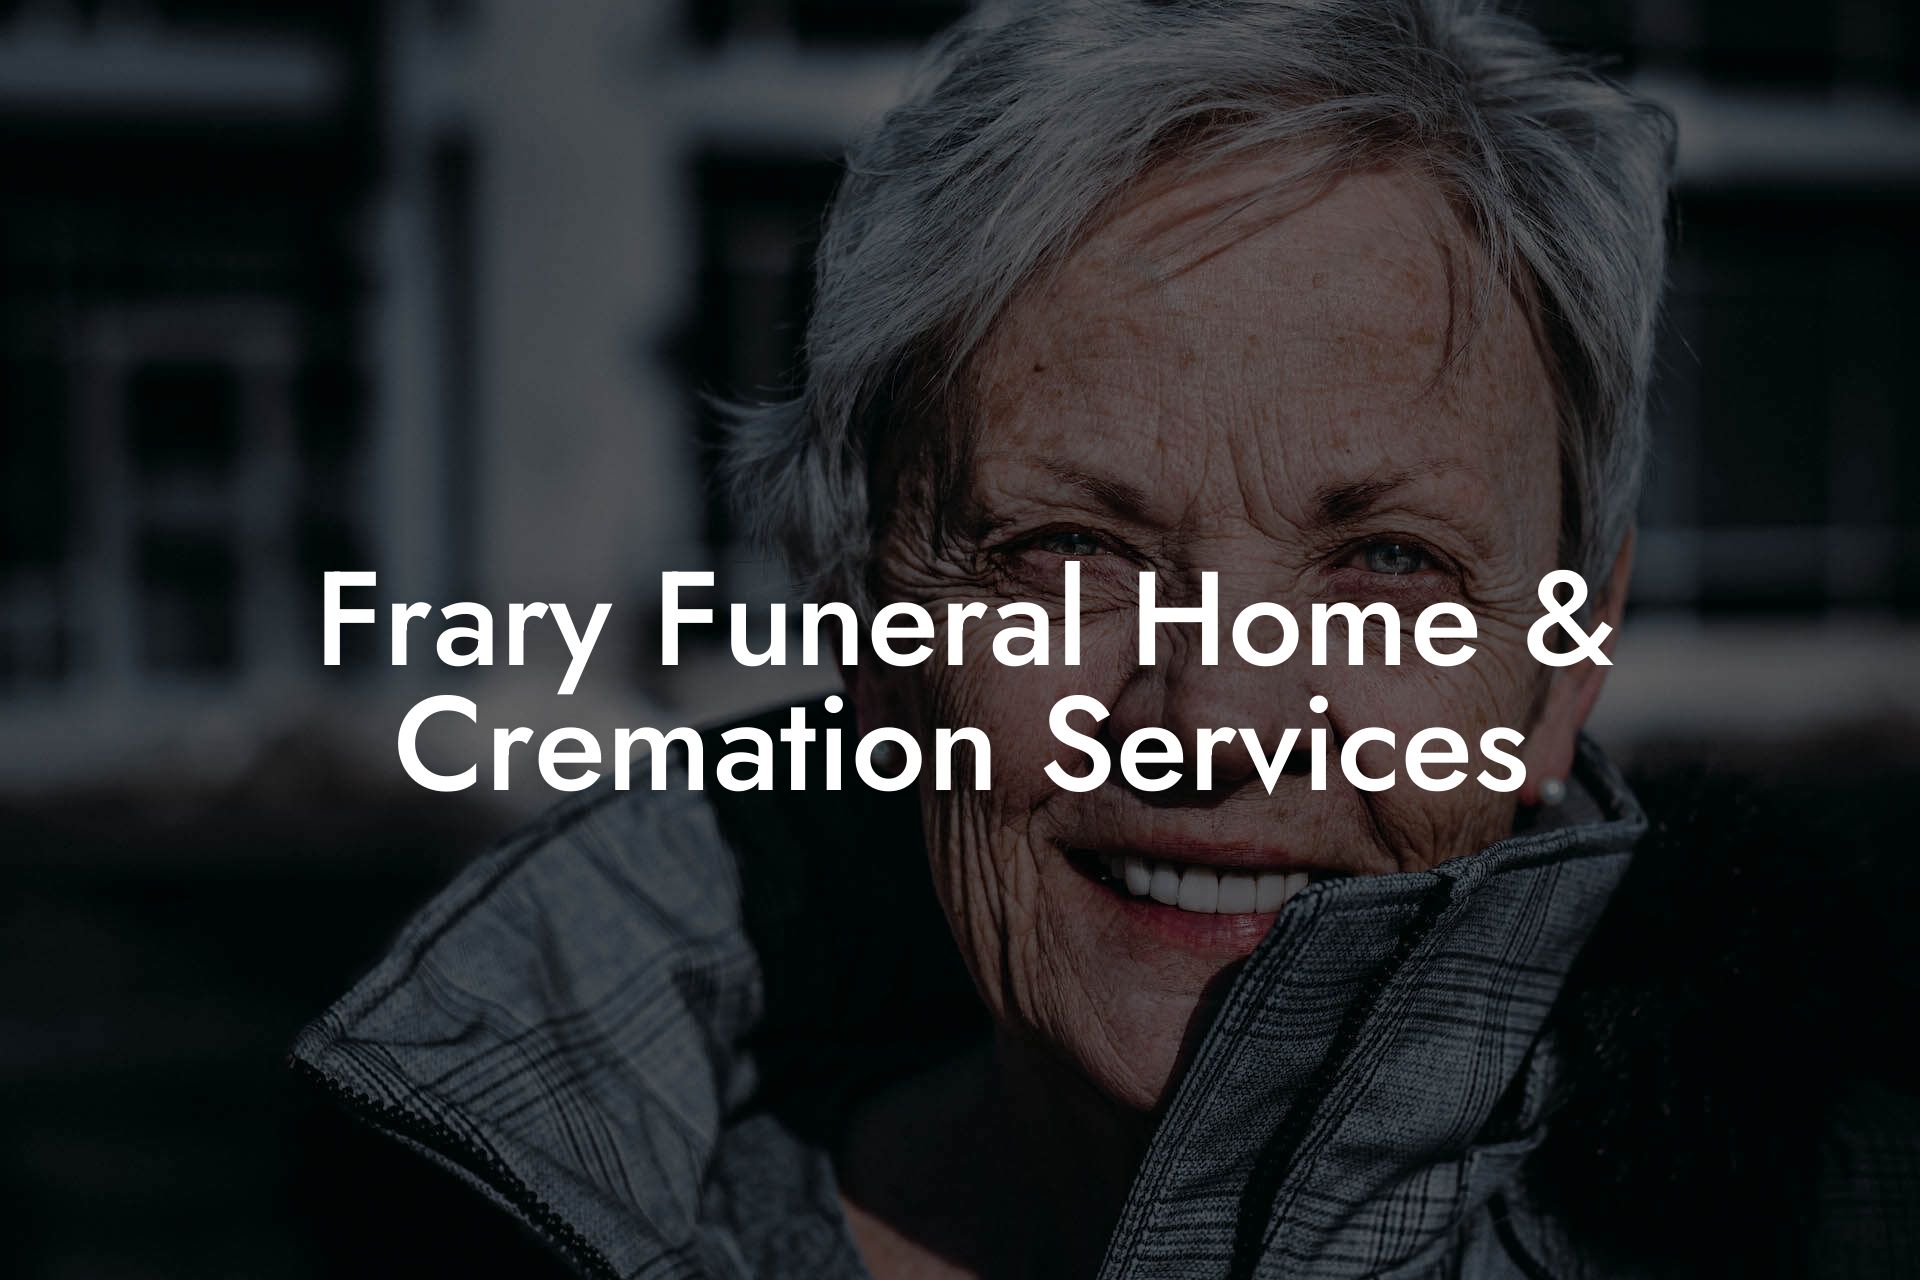 Frary Funeral Home & Cremation Services